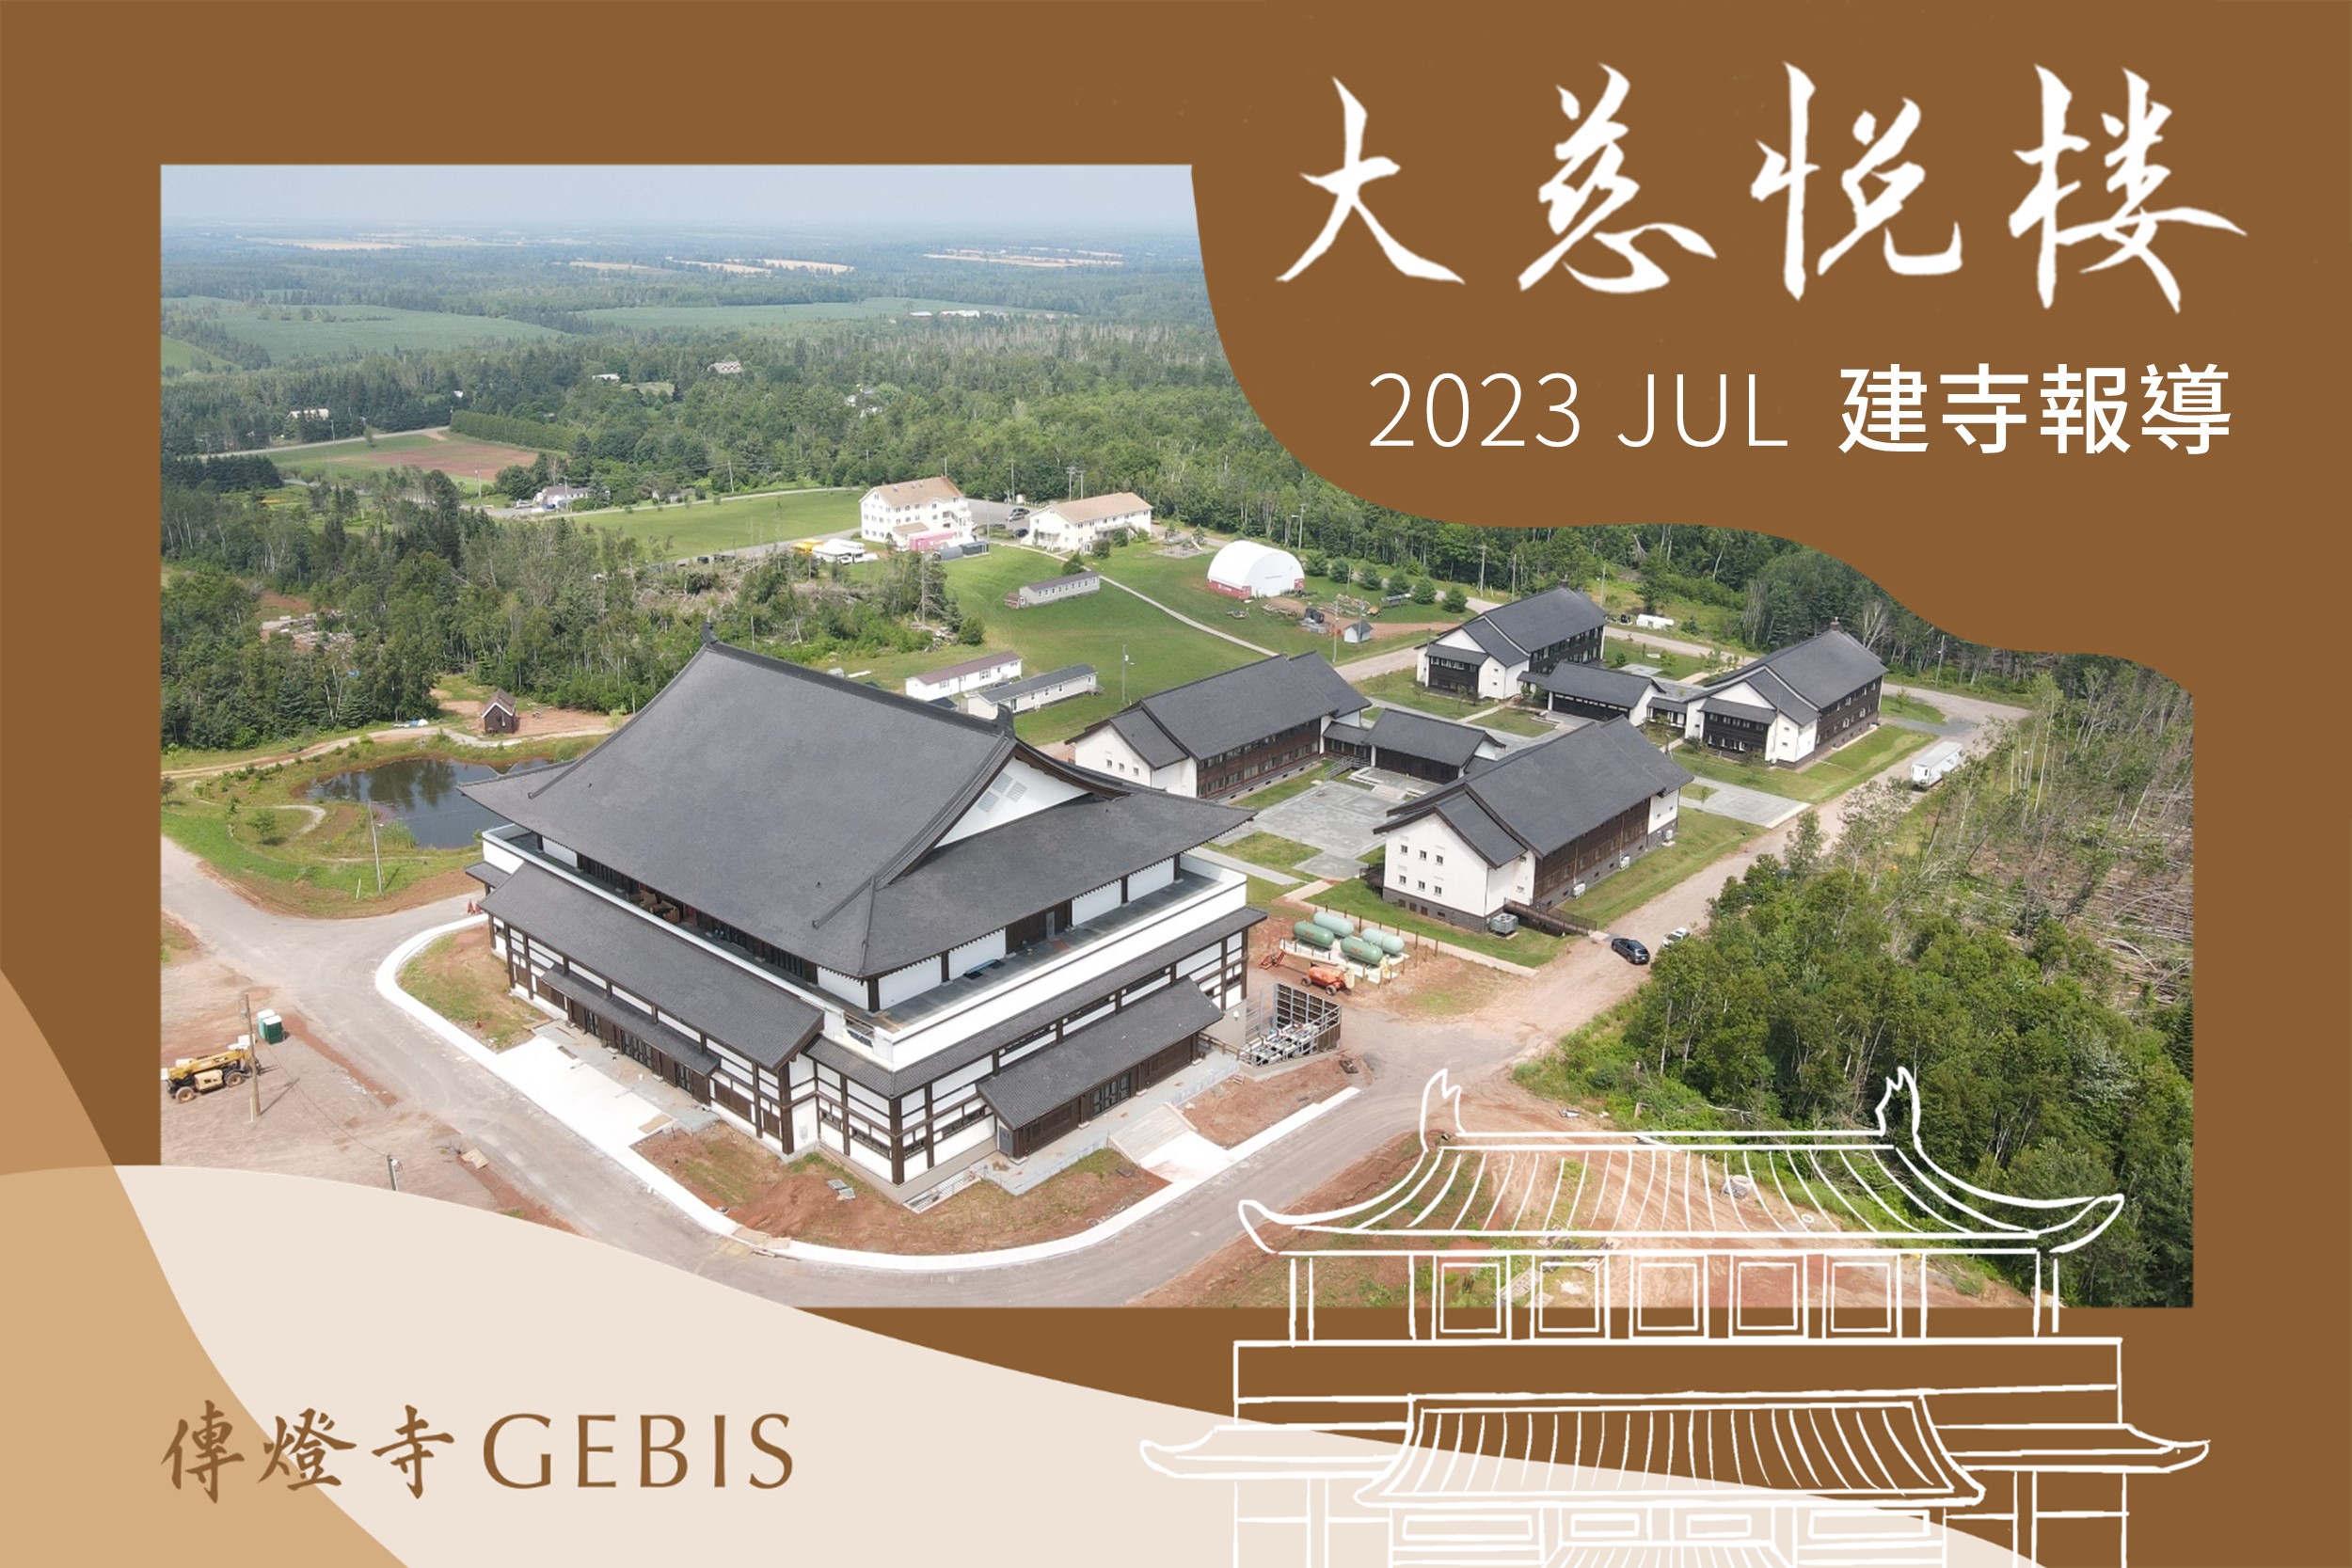 You are currently viewing 傳燈寺大慈悅樓：2023年7月建寺報導